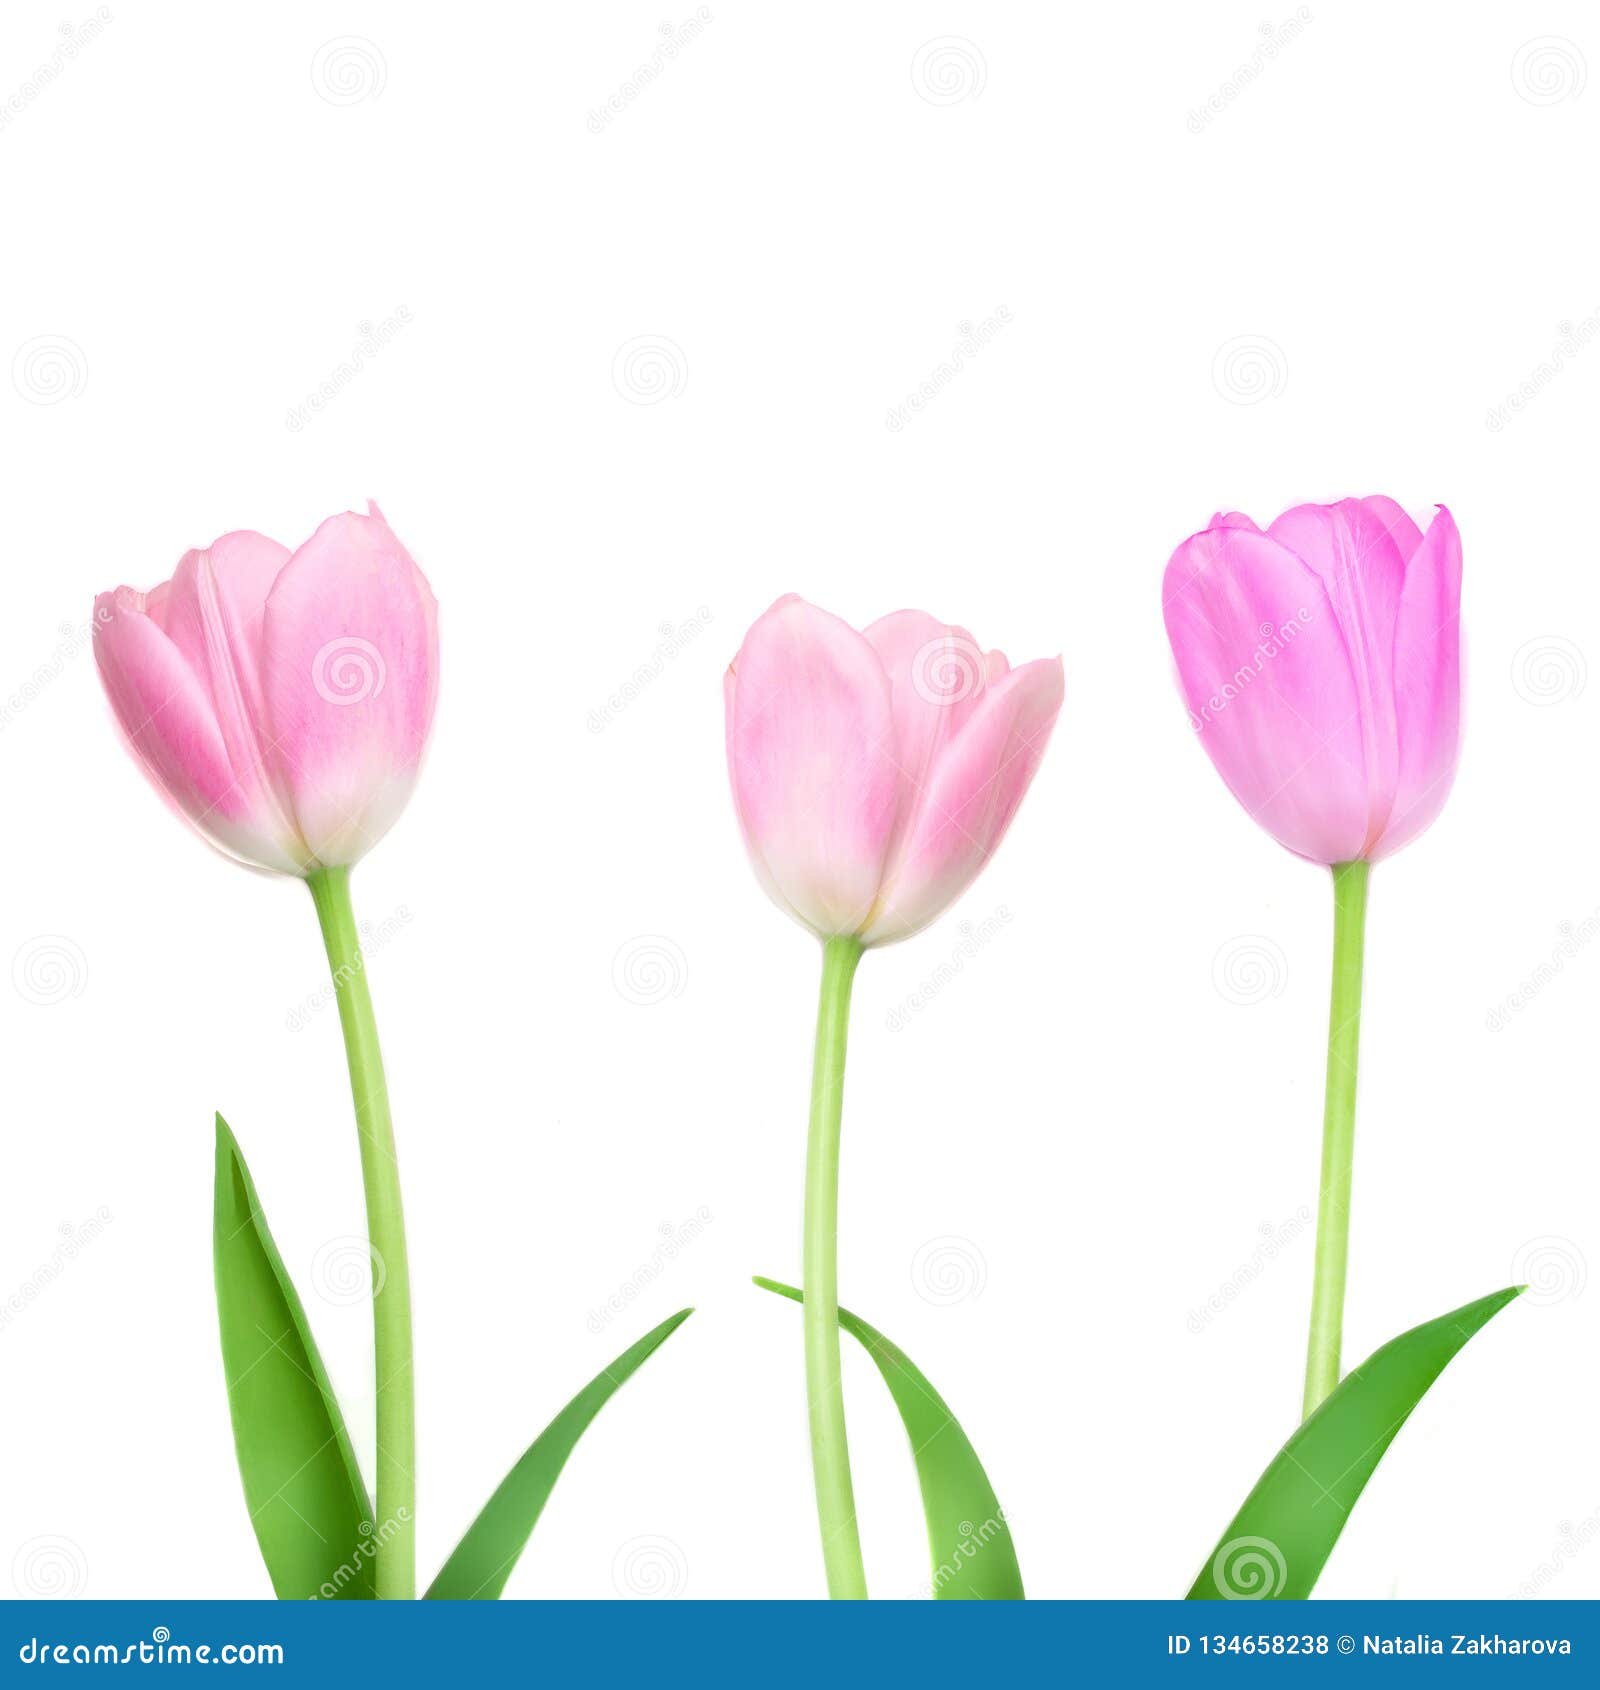 Tulips Flower Isolated on White Background. Row of Beautiful Spring ...